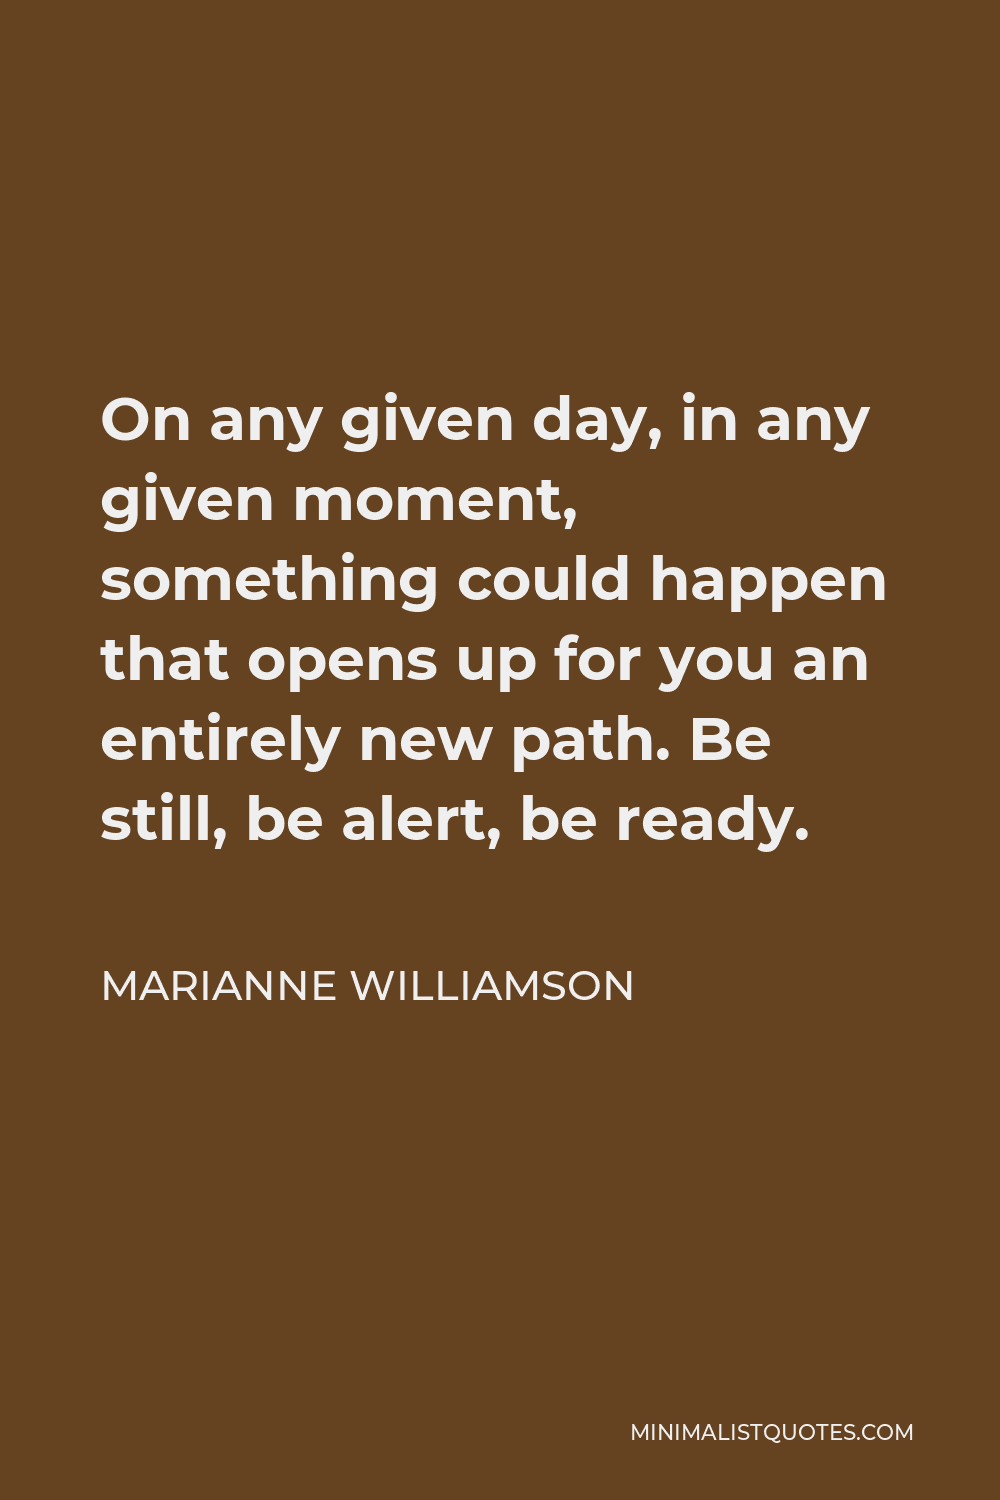 Marianne Williamson Quote - On any given day, in any given moment, something could happen that opens up for you an entirely new path. Be still, be alert, be ready.